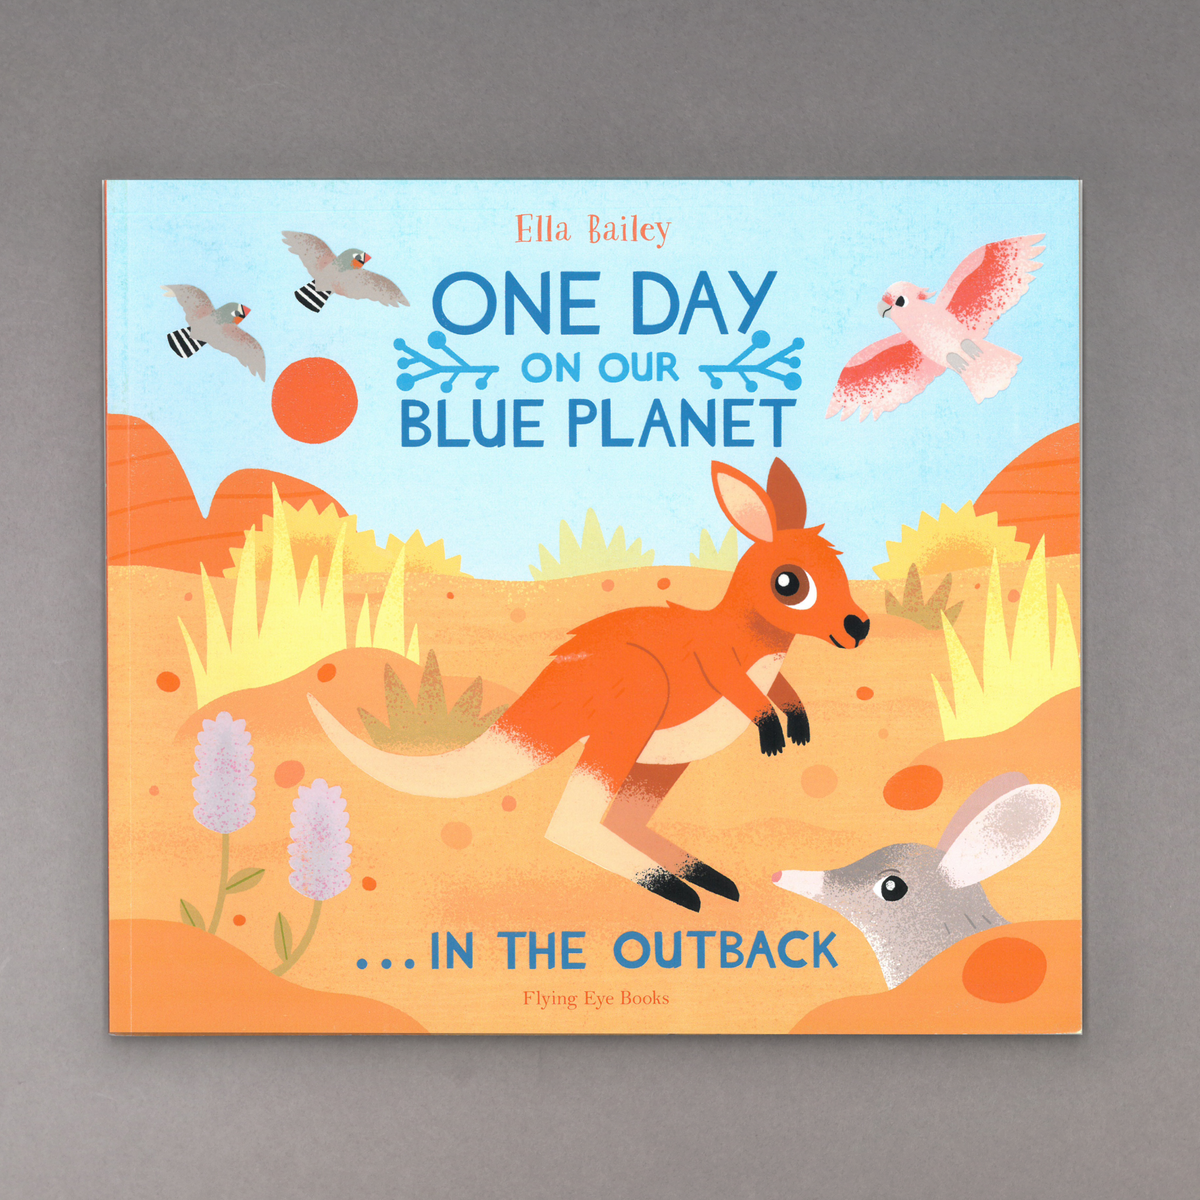 One Day on our Blue Planet: In the Outback